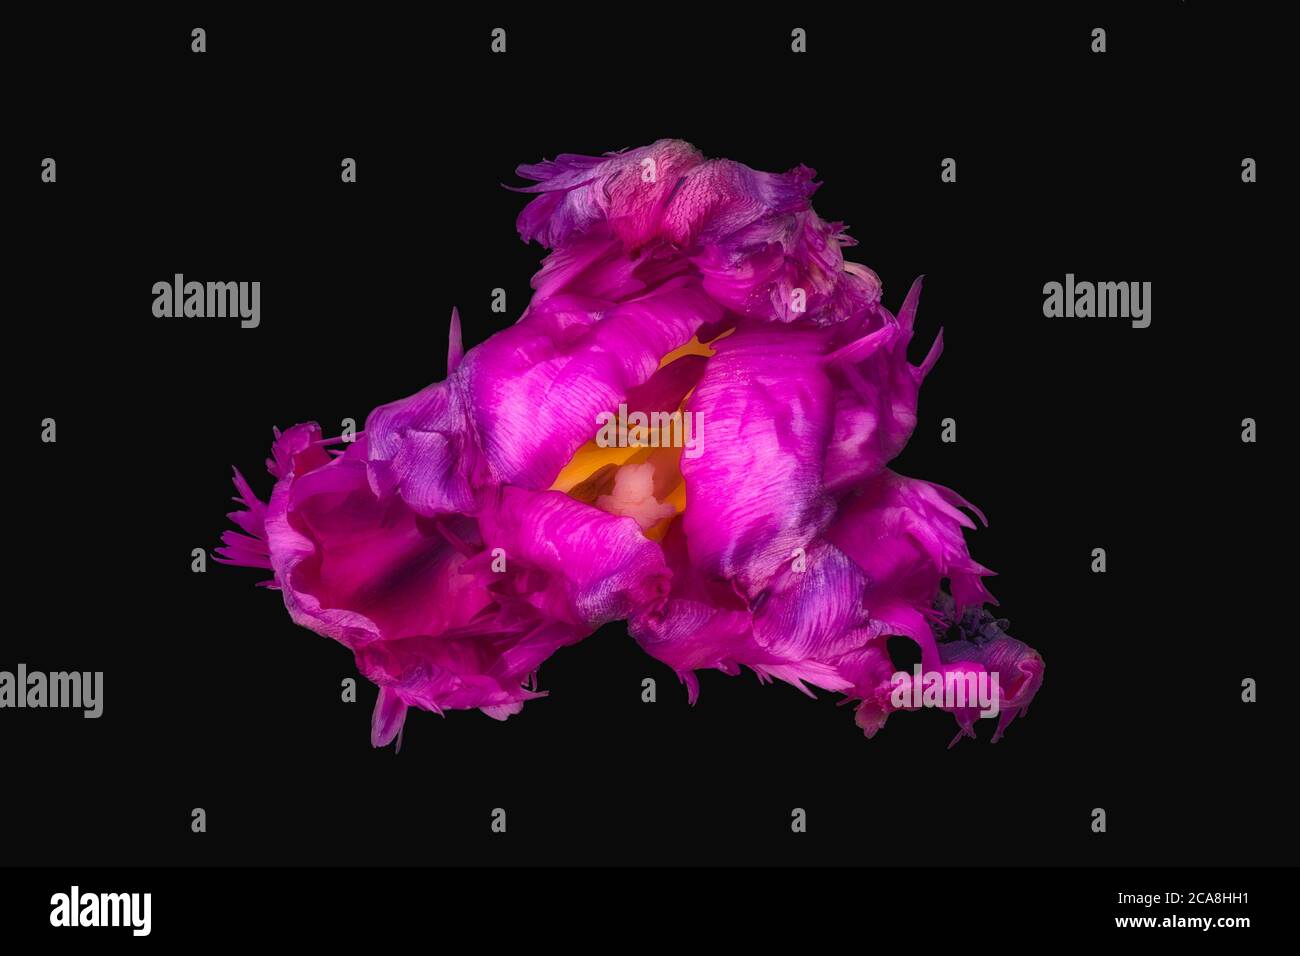 red violet parrot tulip surrealistic fantasy macro,black background, fine art still life vintage painting style Stock Photo